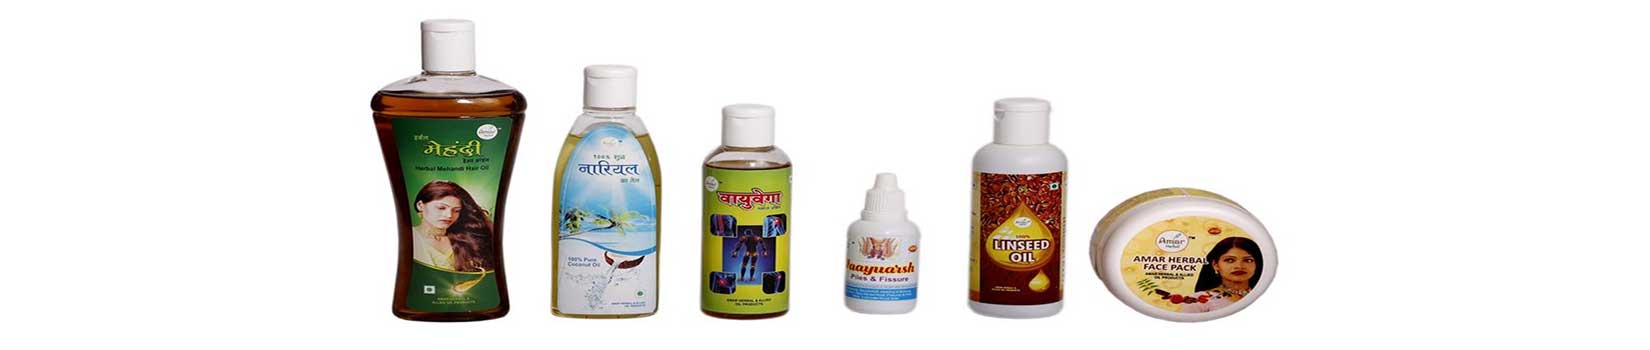 Amar Herbal Oil and Allide Herbal Products